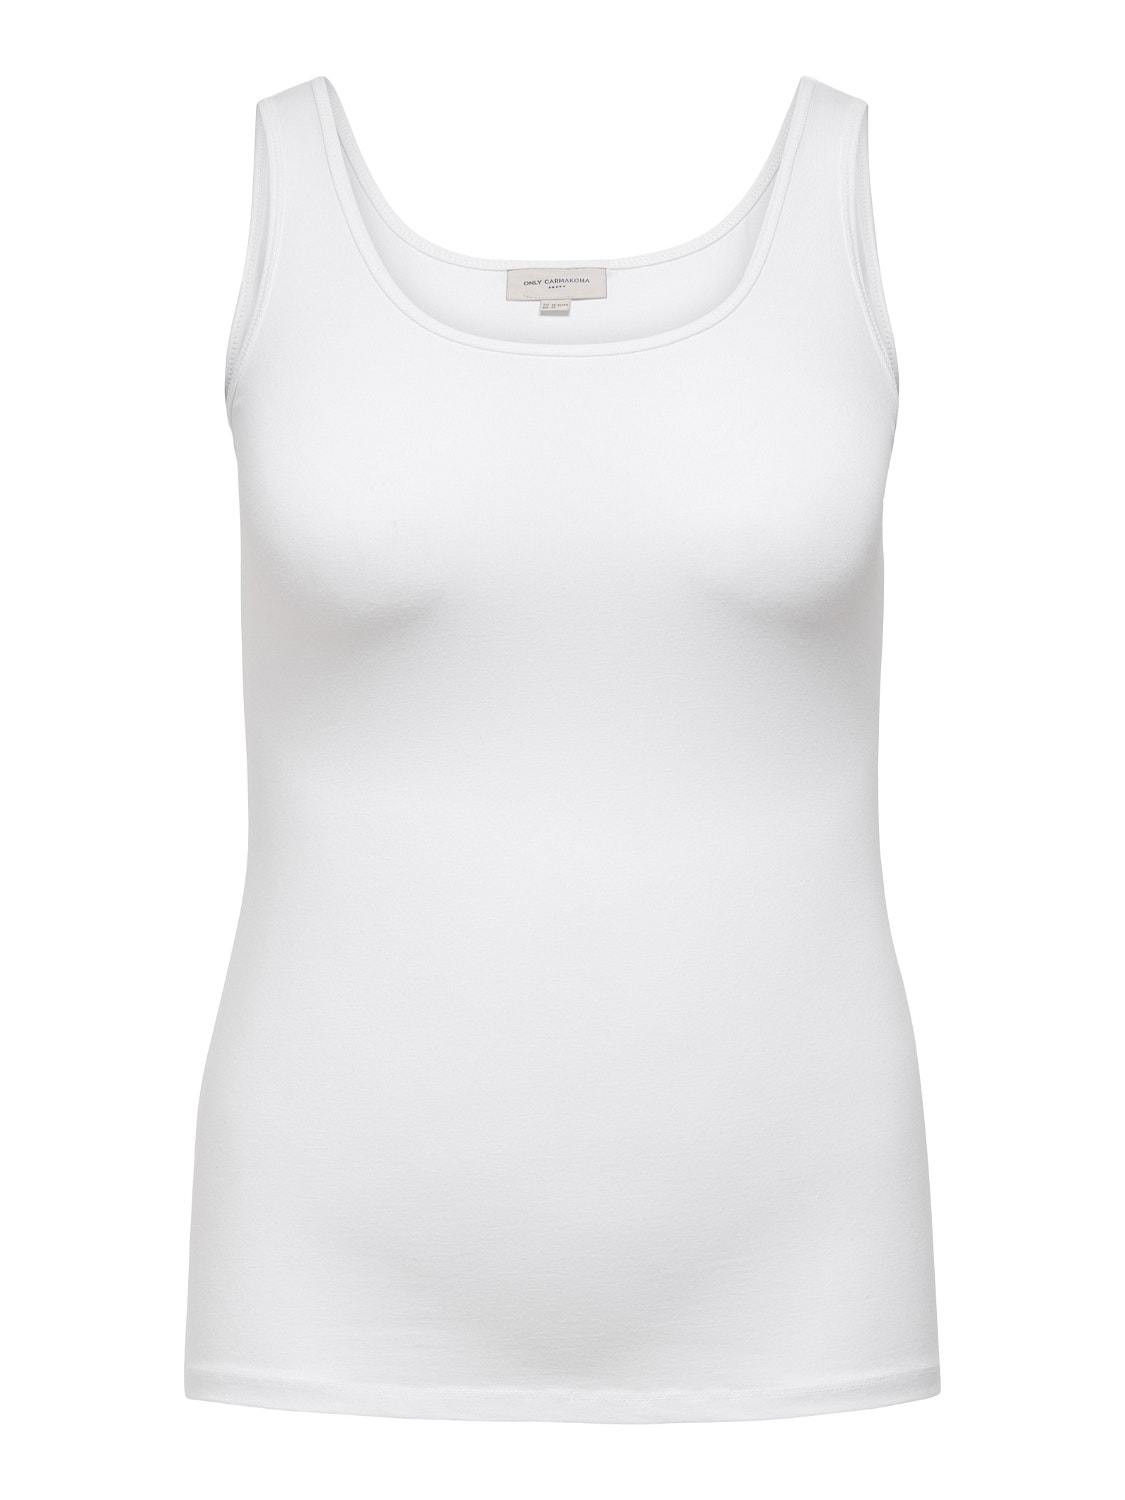 ONLY Slim fit O-hals Tanktop -White - 15188036